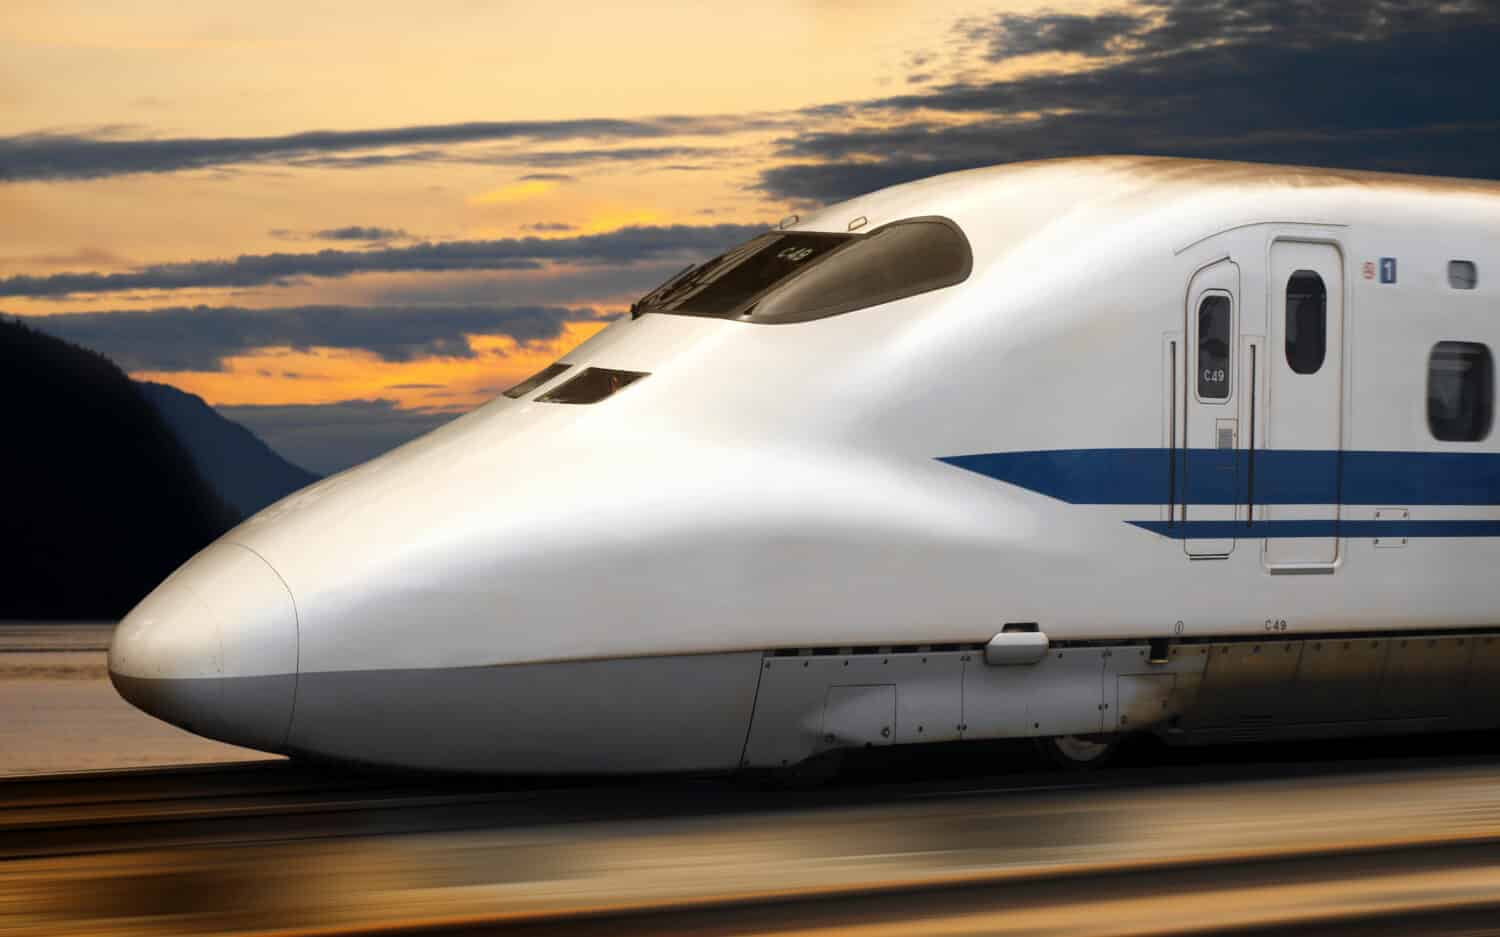 Shinkansen Bullet Train in Japan. The Shinkansen is a network of high-speed railway lines in Japan. Since the initial Tokaido Shinkansen opened in 1964 with running speeds of 210 km/h (130 mph).